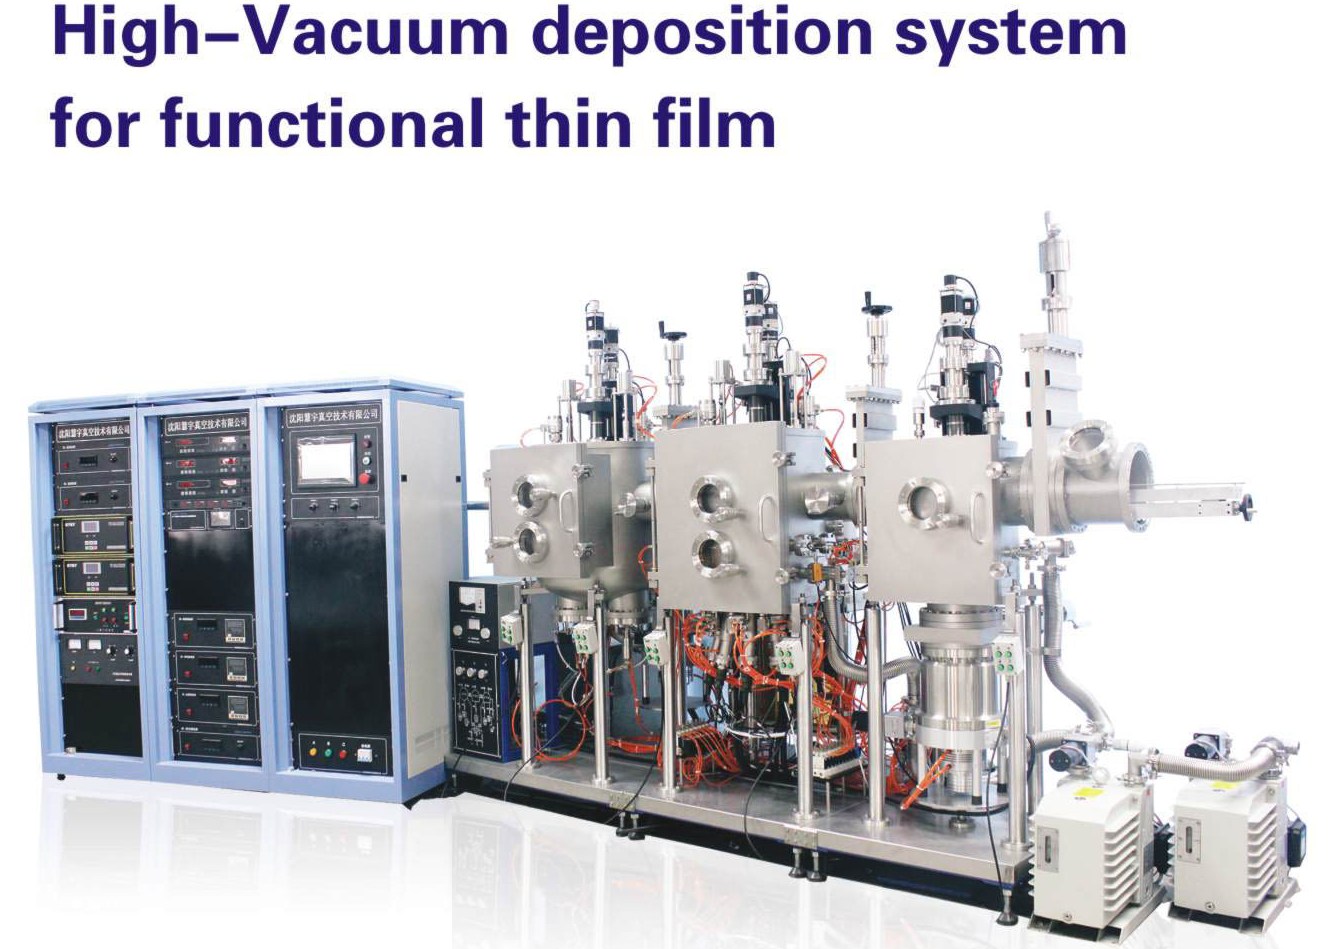 High-Vacuum deposition system for functional thin film